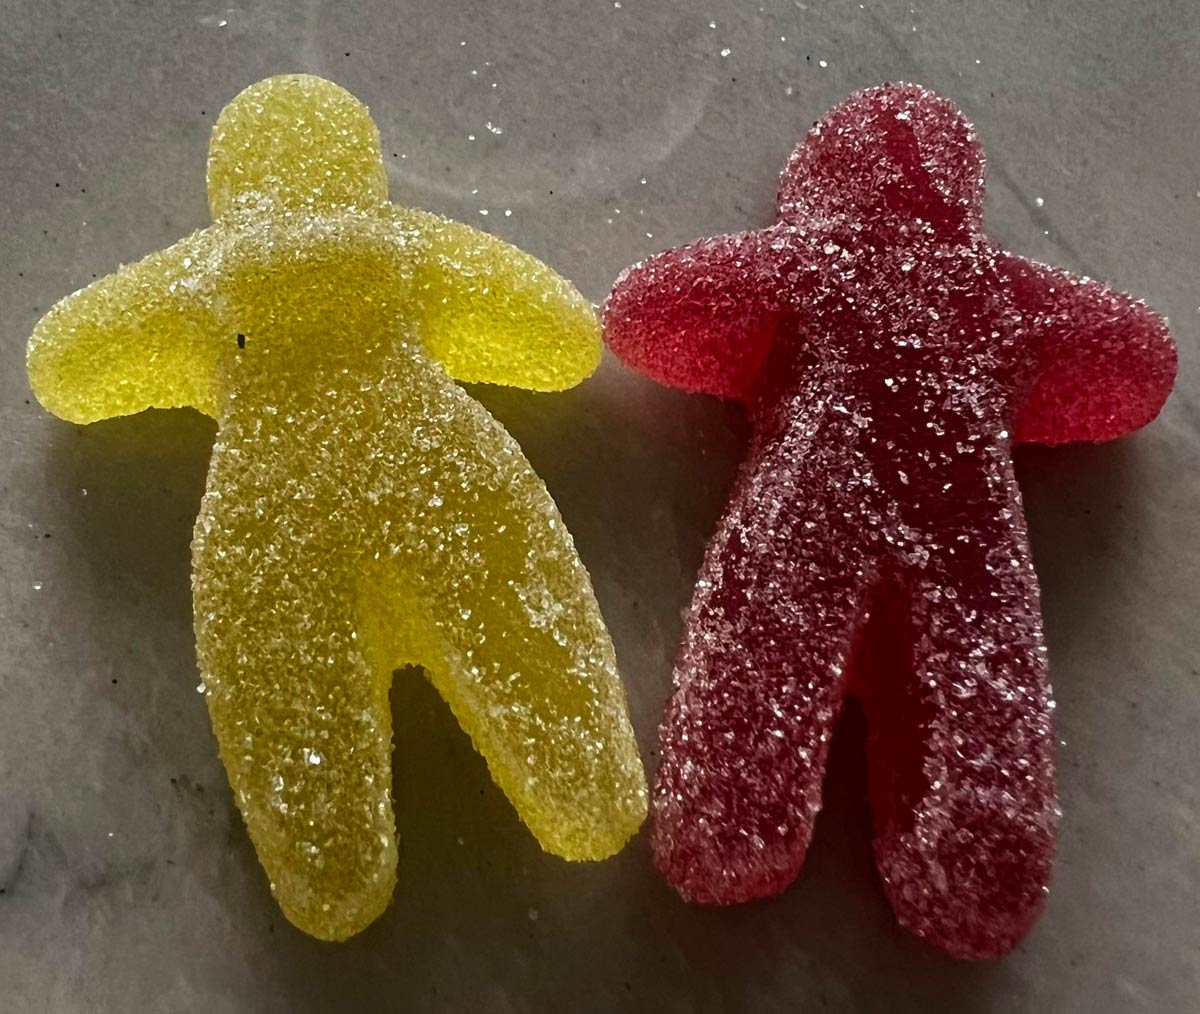 This gummy brand of candies from Norway have boobs on half of the gummies